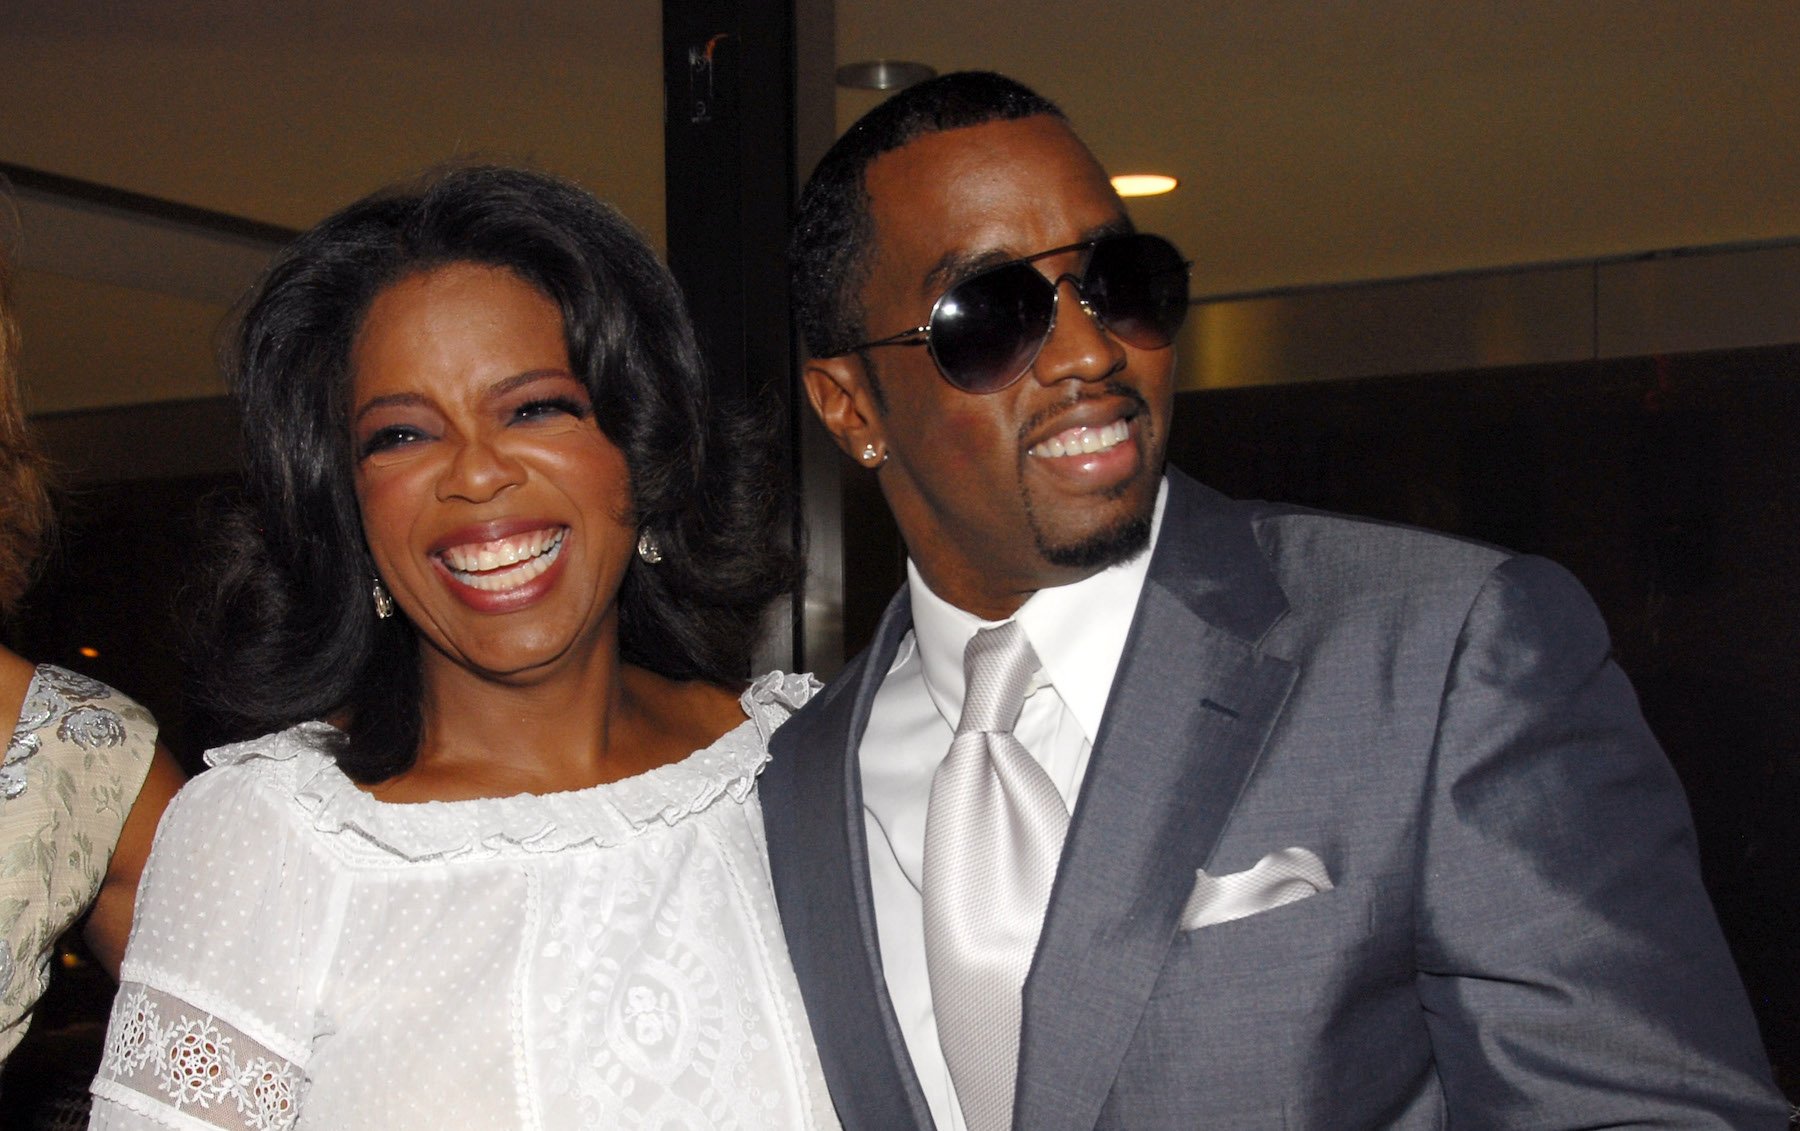 The 1 Question Diddy Refused to Answer When He Was Interviewed by Oprah in  2006